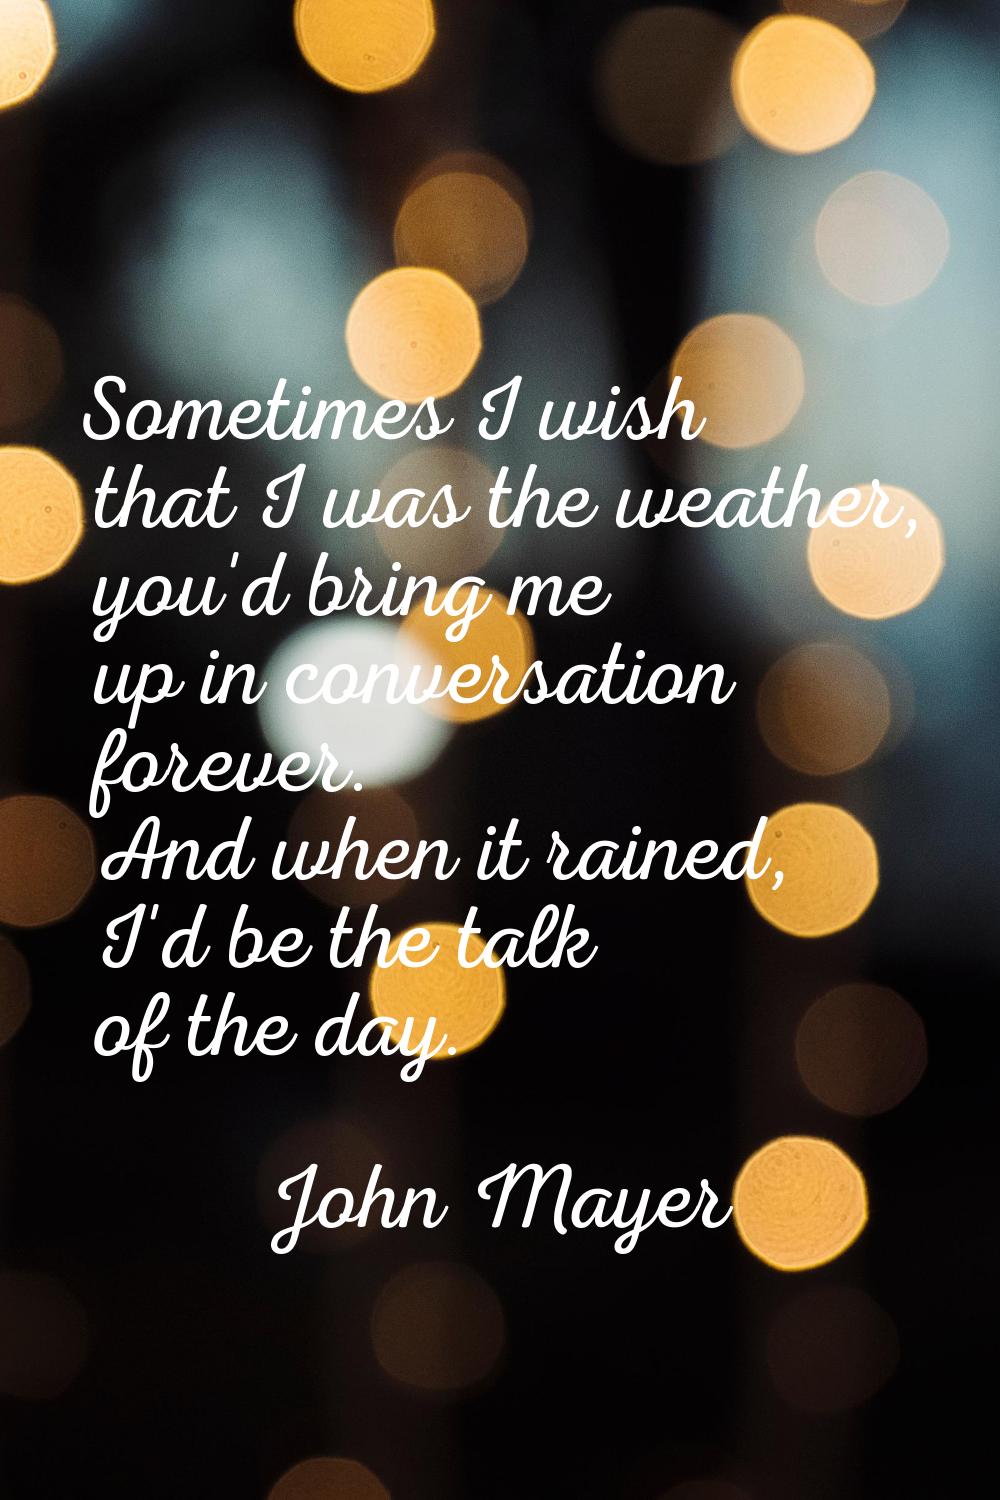 Sometimes I wish that I was the weather, you'd bring me up in conversation forever. And when it rai